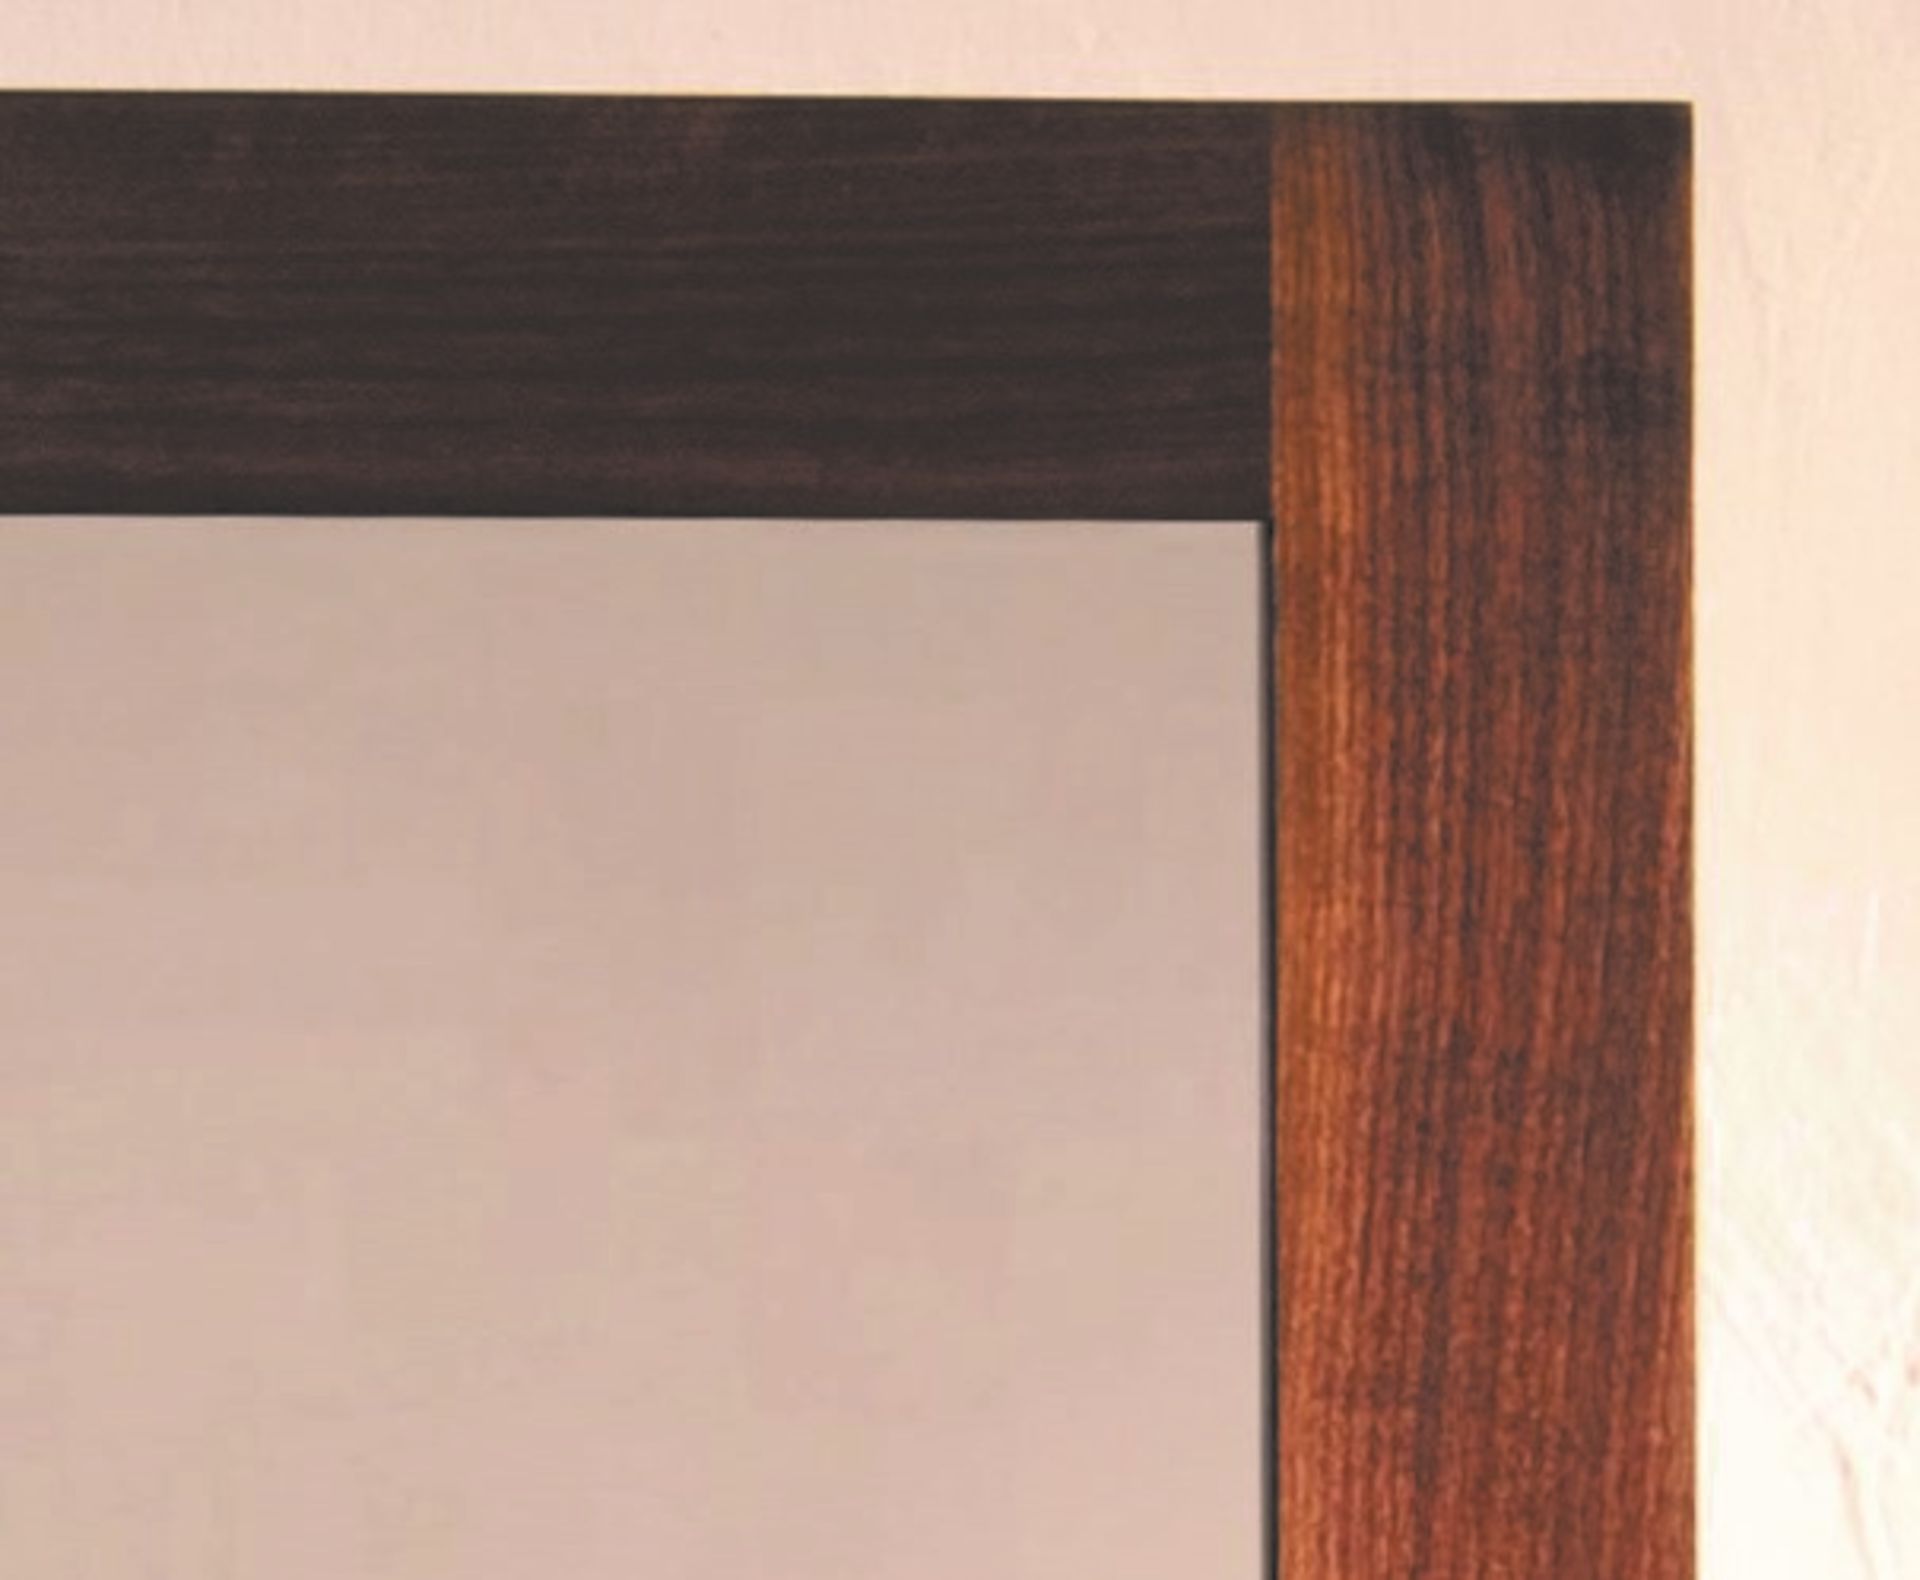 1 x Stonearth Bathroom Wall Mirror With Solid Walnut Frame and Bevelled Glass Mirror - Size: Large - Image 3 of 11